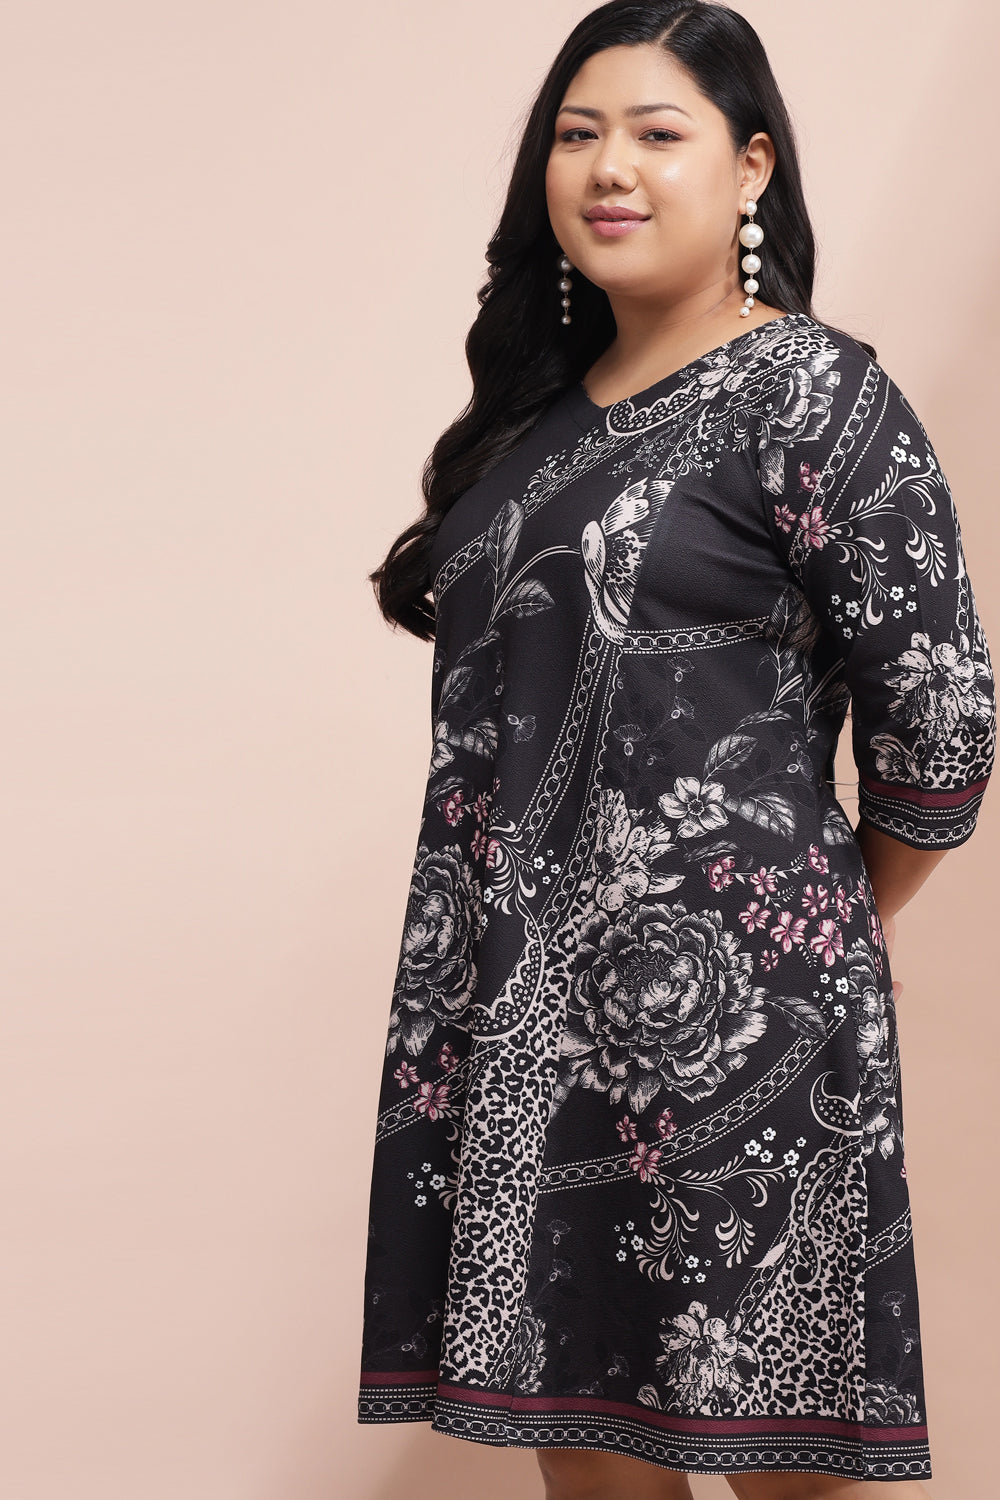 Plus Size Eclectic Printed Party Dress